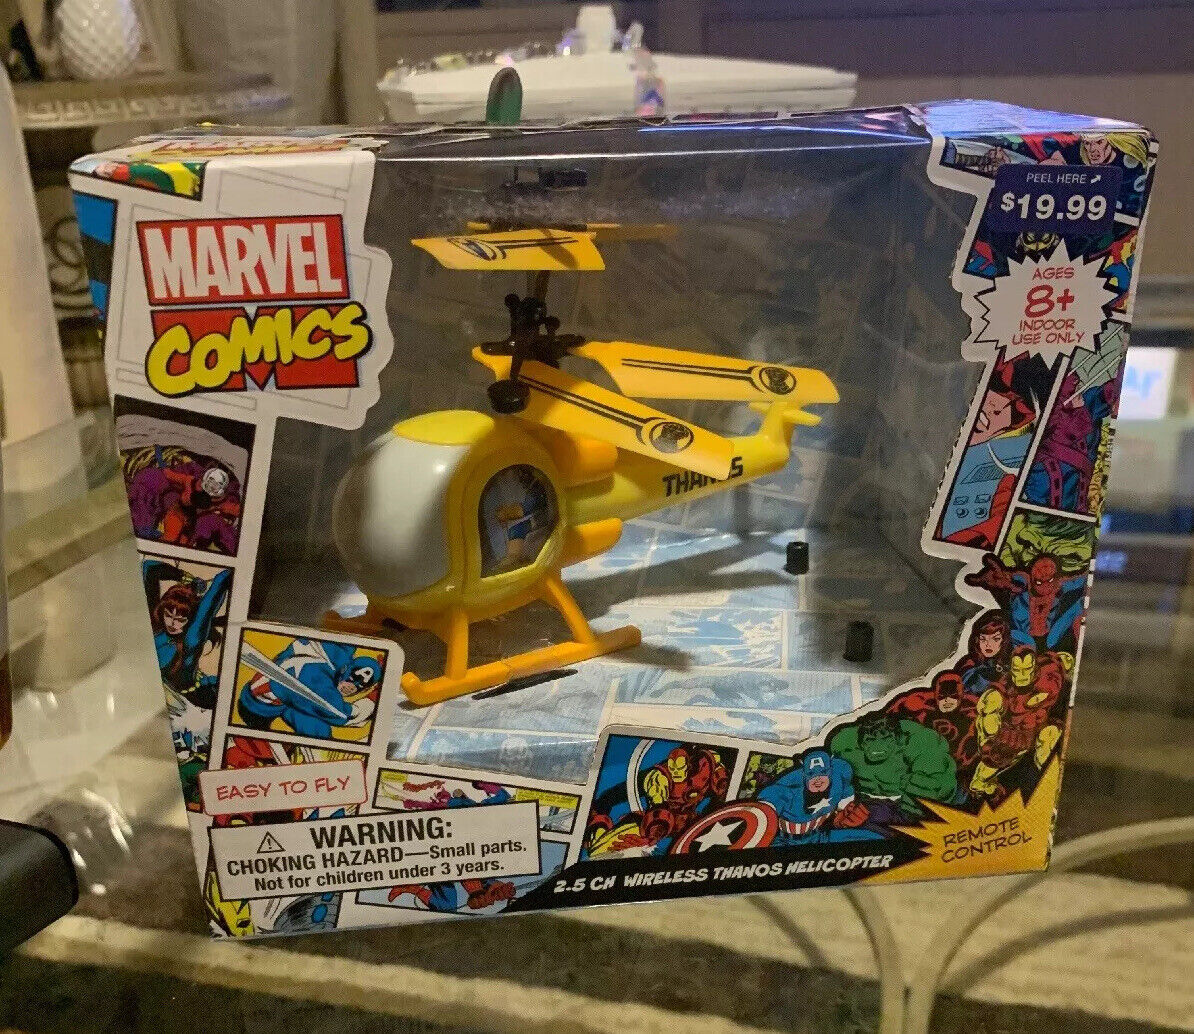 Thanos Helicopter Marvel Comics 2.5CH Wireless w/ Remote Control Marvel Avengers 